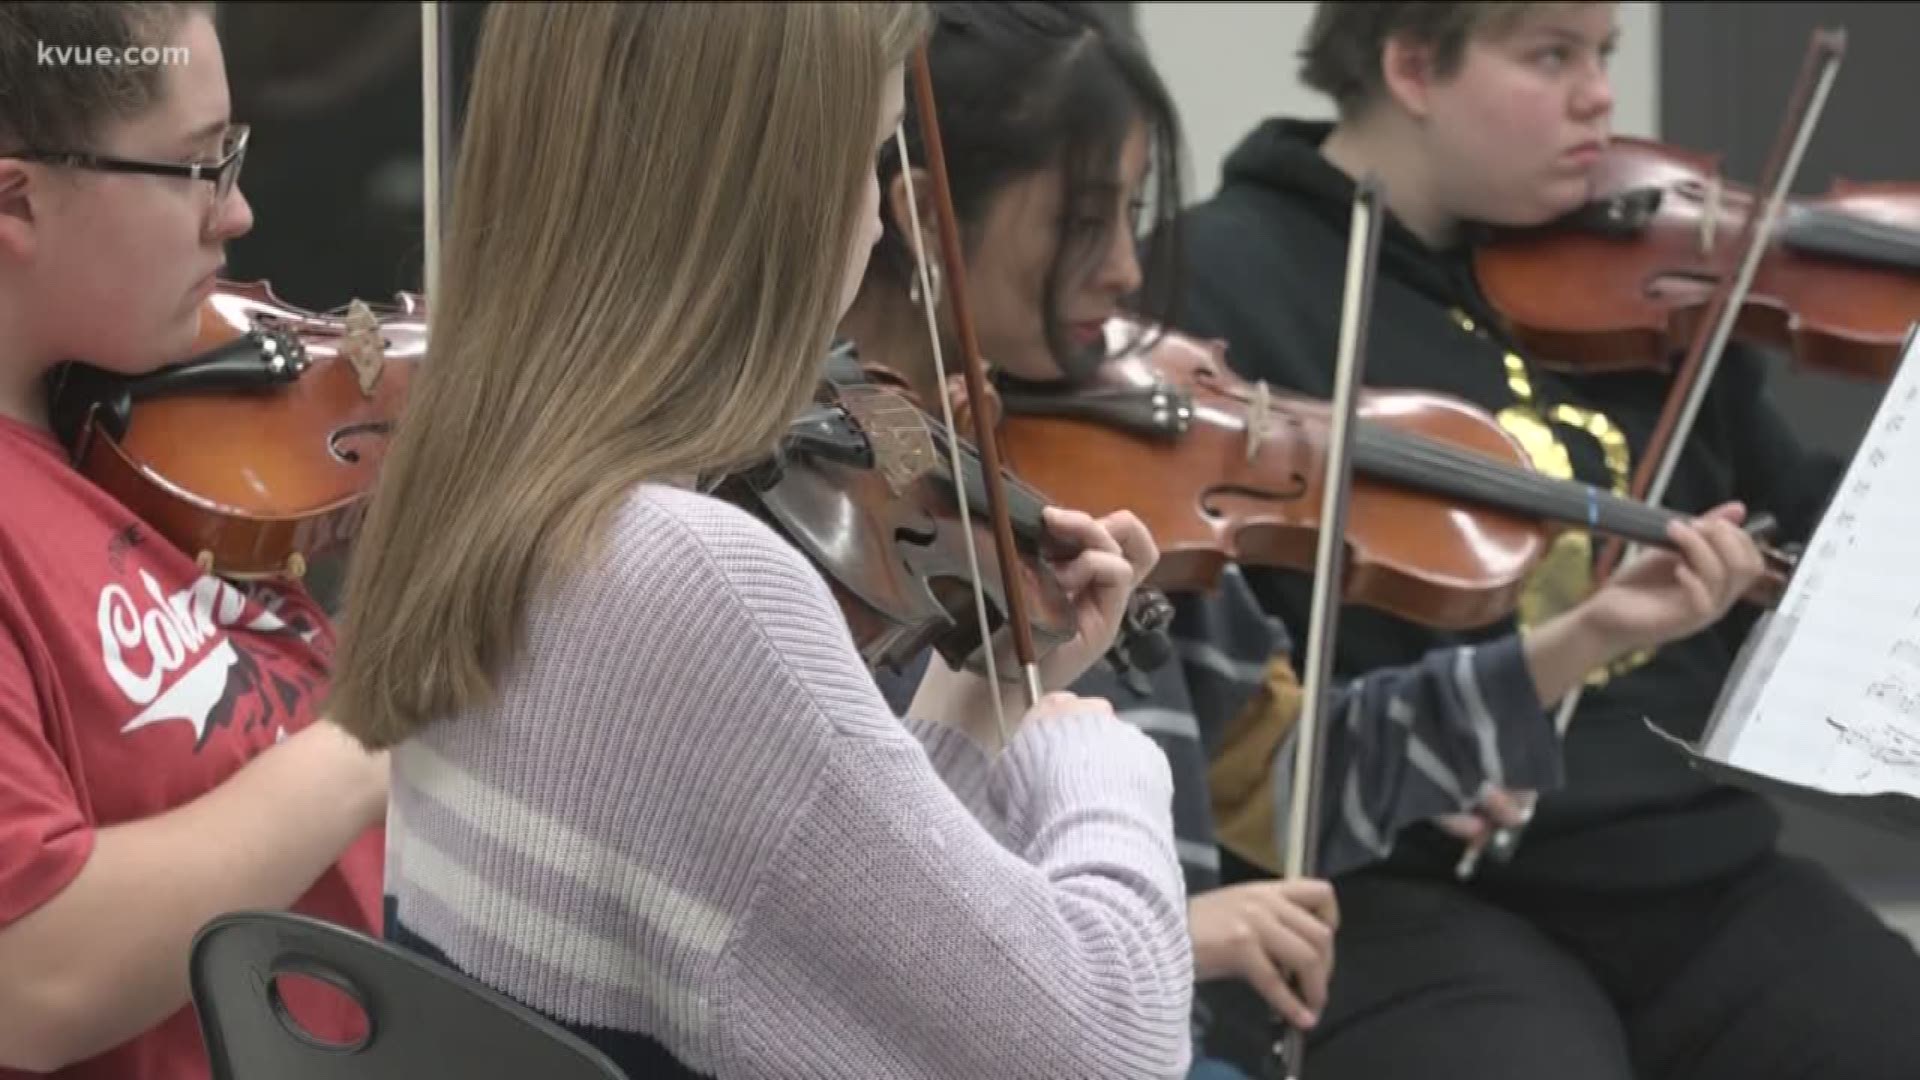 The Georgetown High School orchestra caught the chain's attention and now it's featured in a commercial.